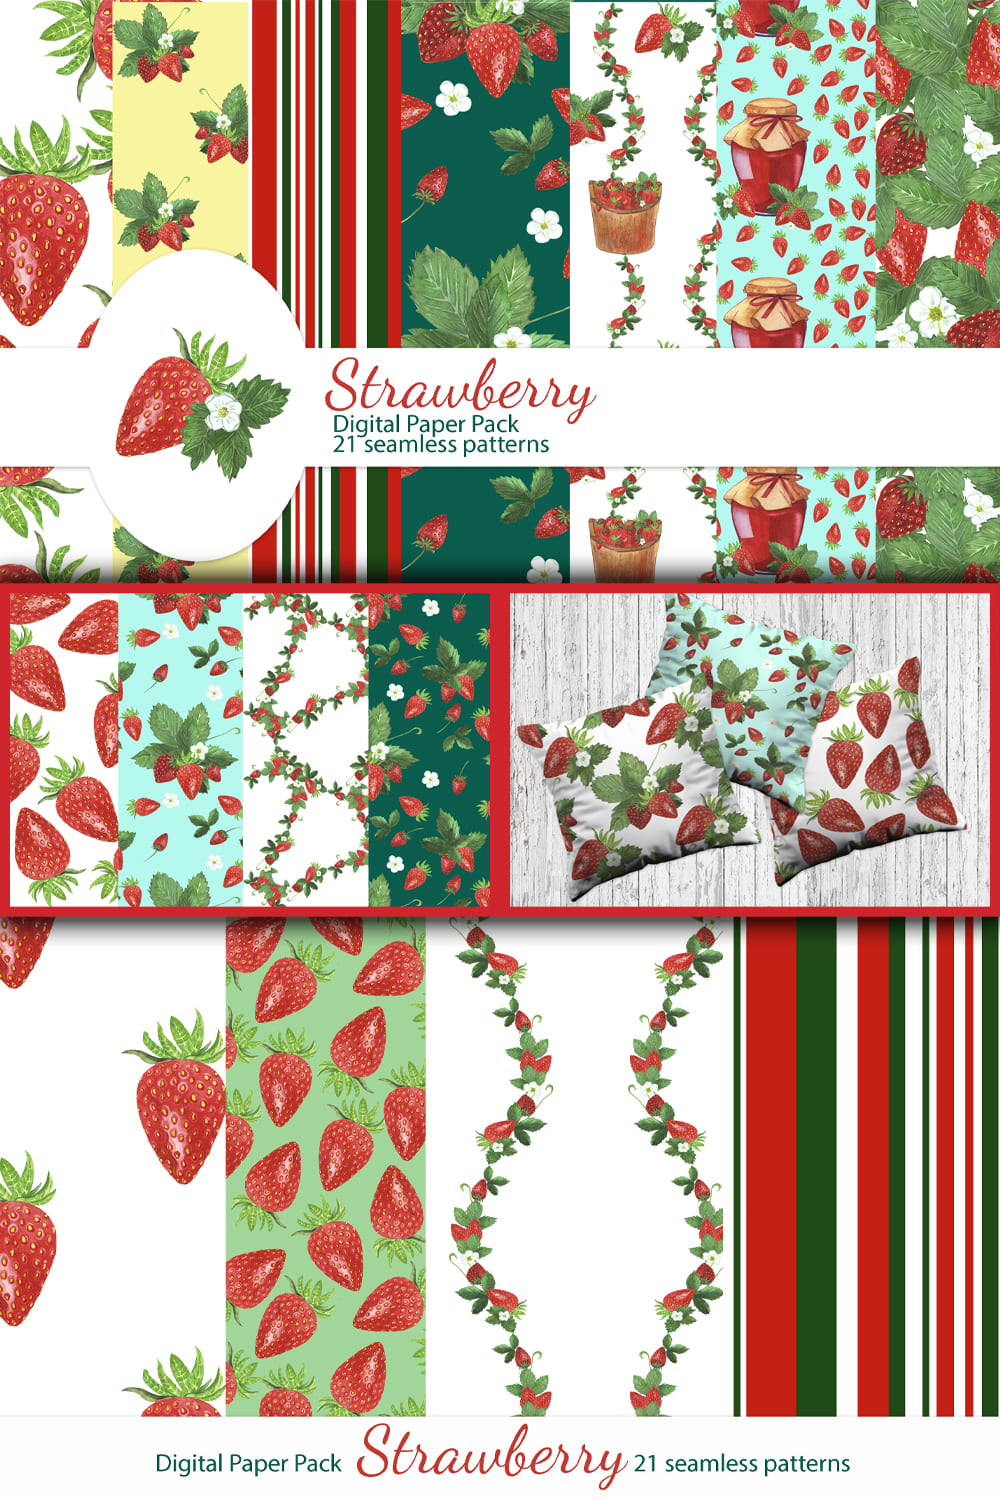 One slide with a strawberry pattern and another slide using this pattern.